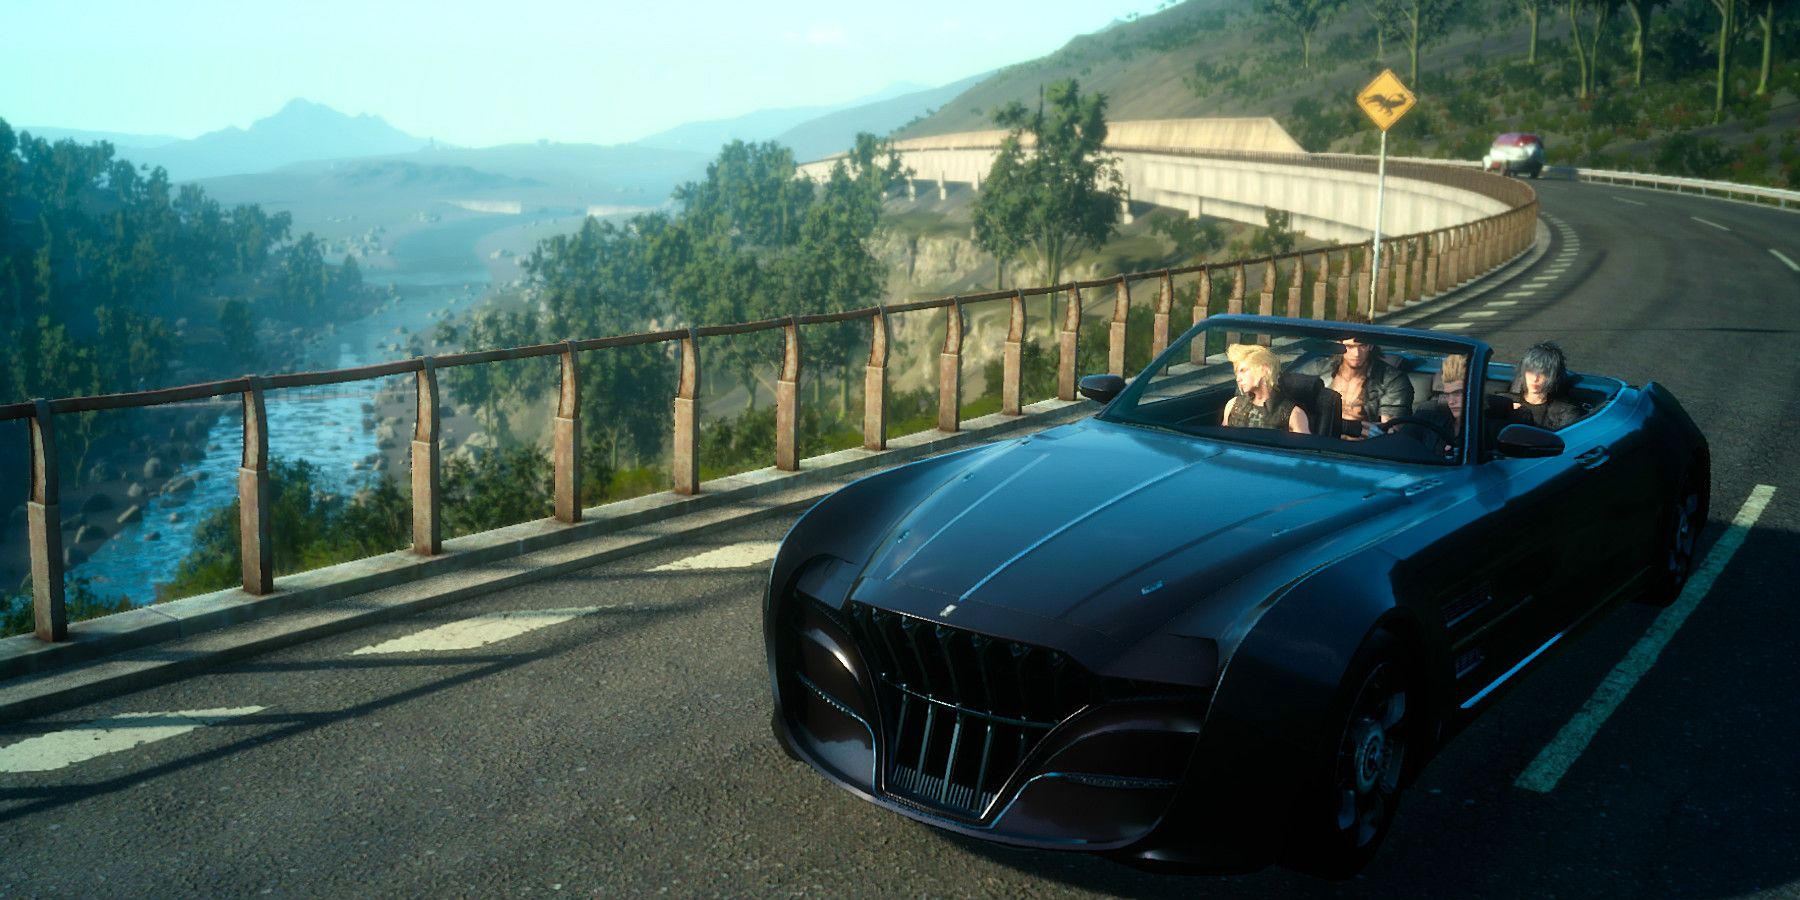 15 Things You Need To Know About Final Fantasy XV